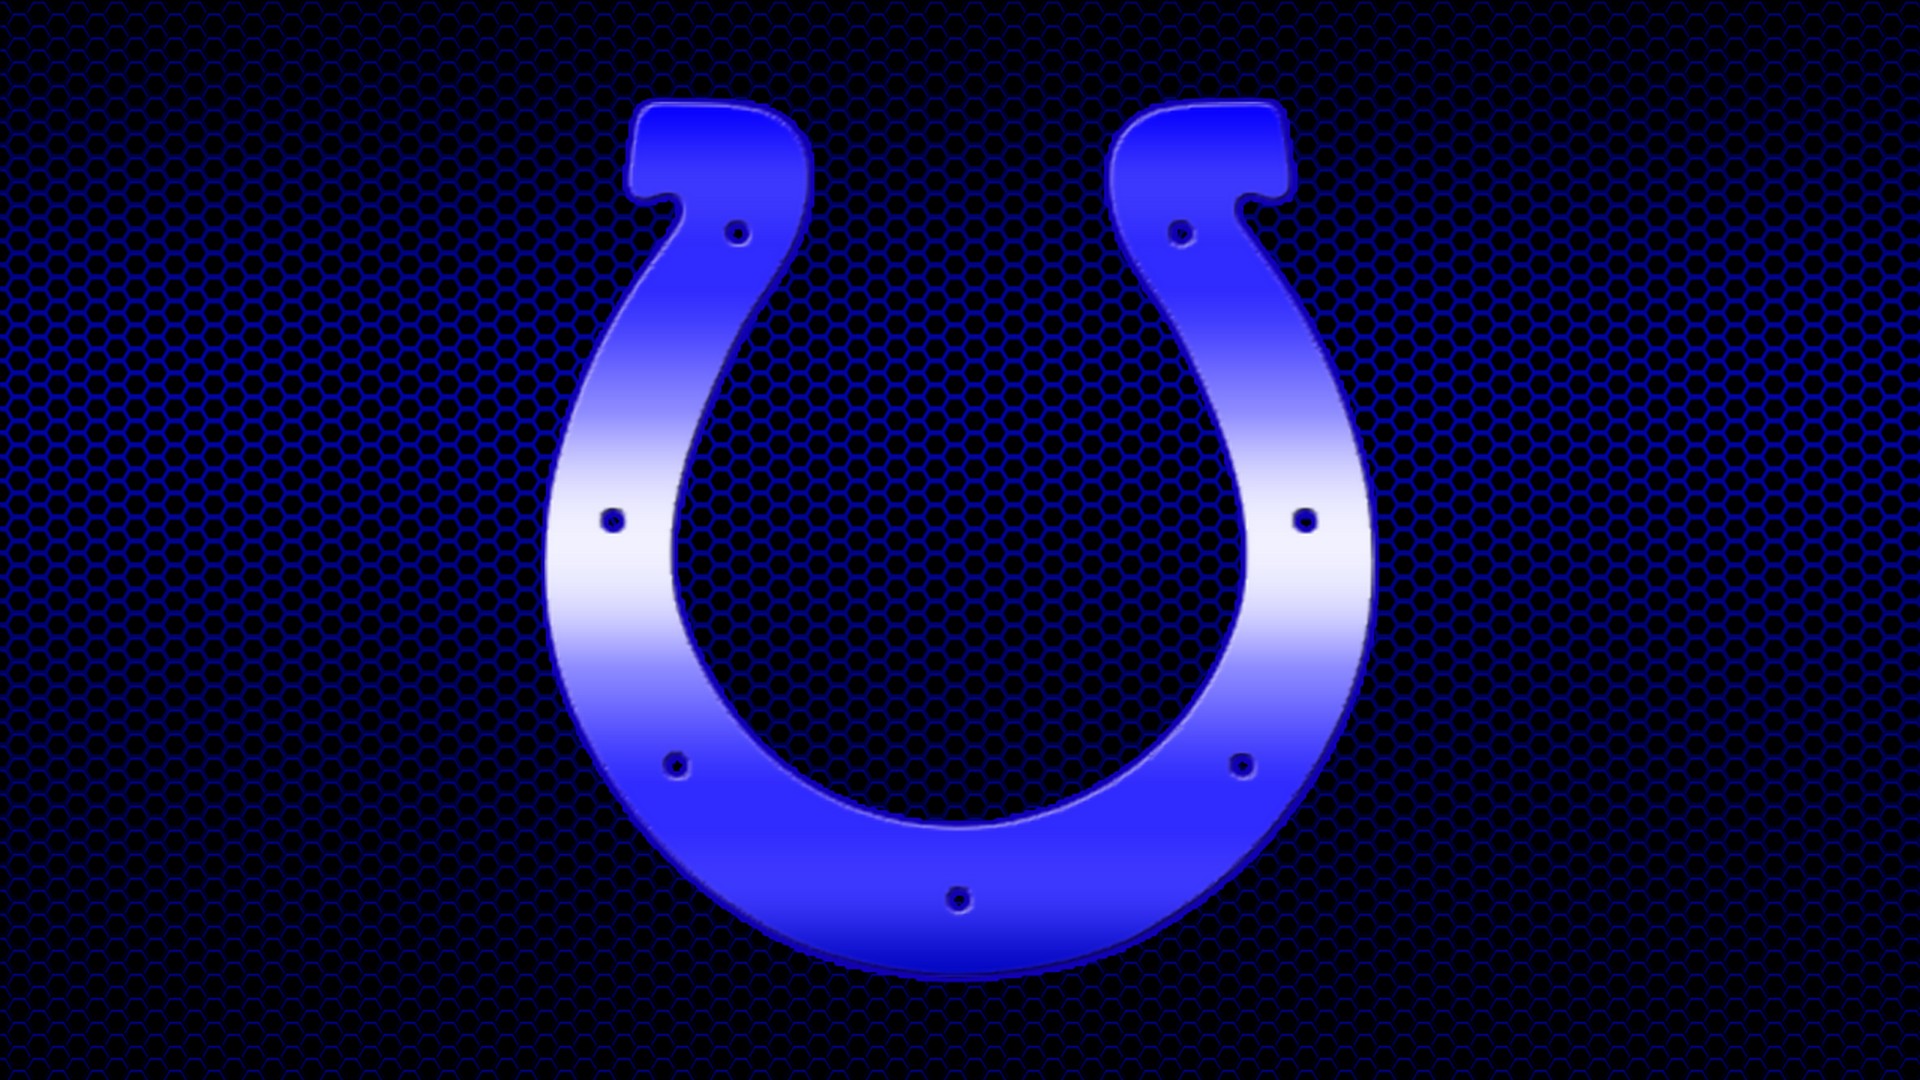 HD Indianapolis Colts NFL Wallpapers with resolution 1920x1080 pixel. You can make this wallpaper for your Mac or Windows Desktop Background, iPhone, Android or Tablet and another Smartphone device